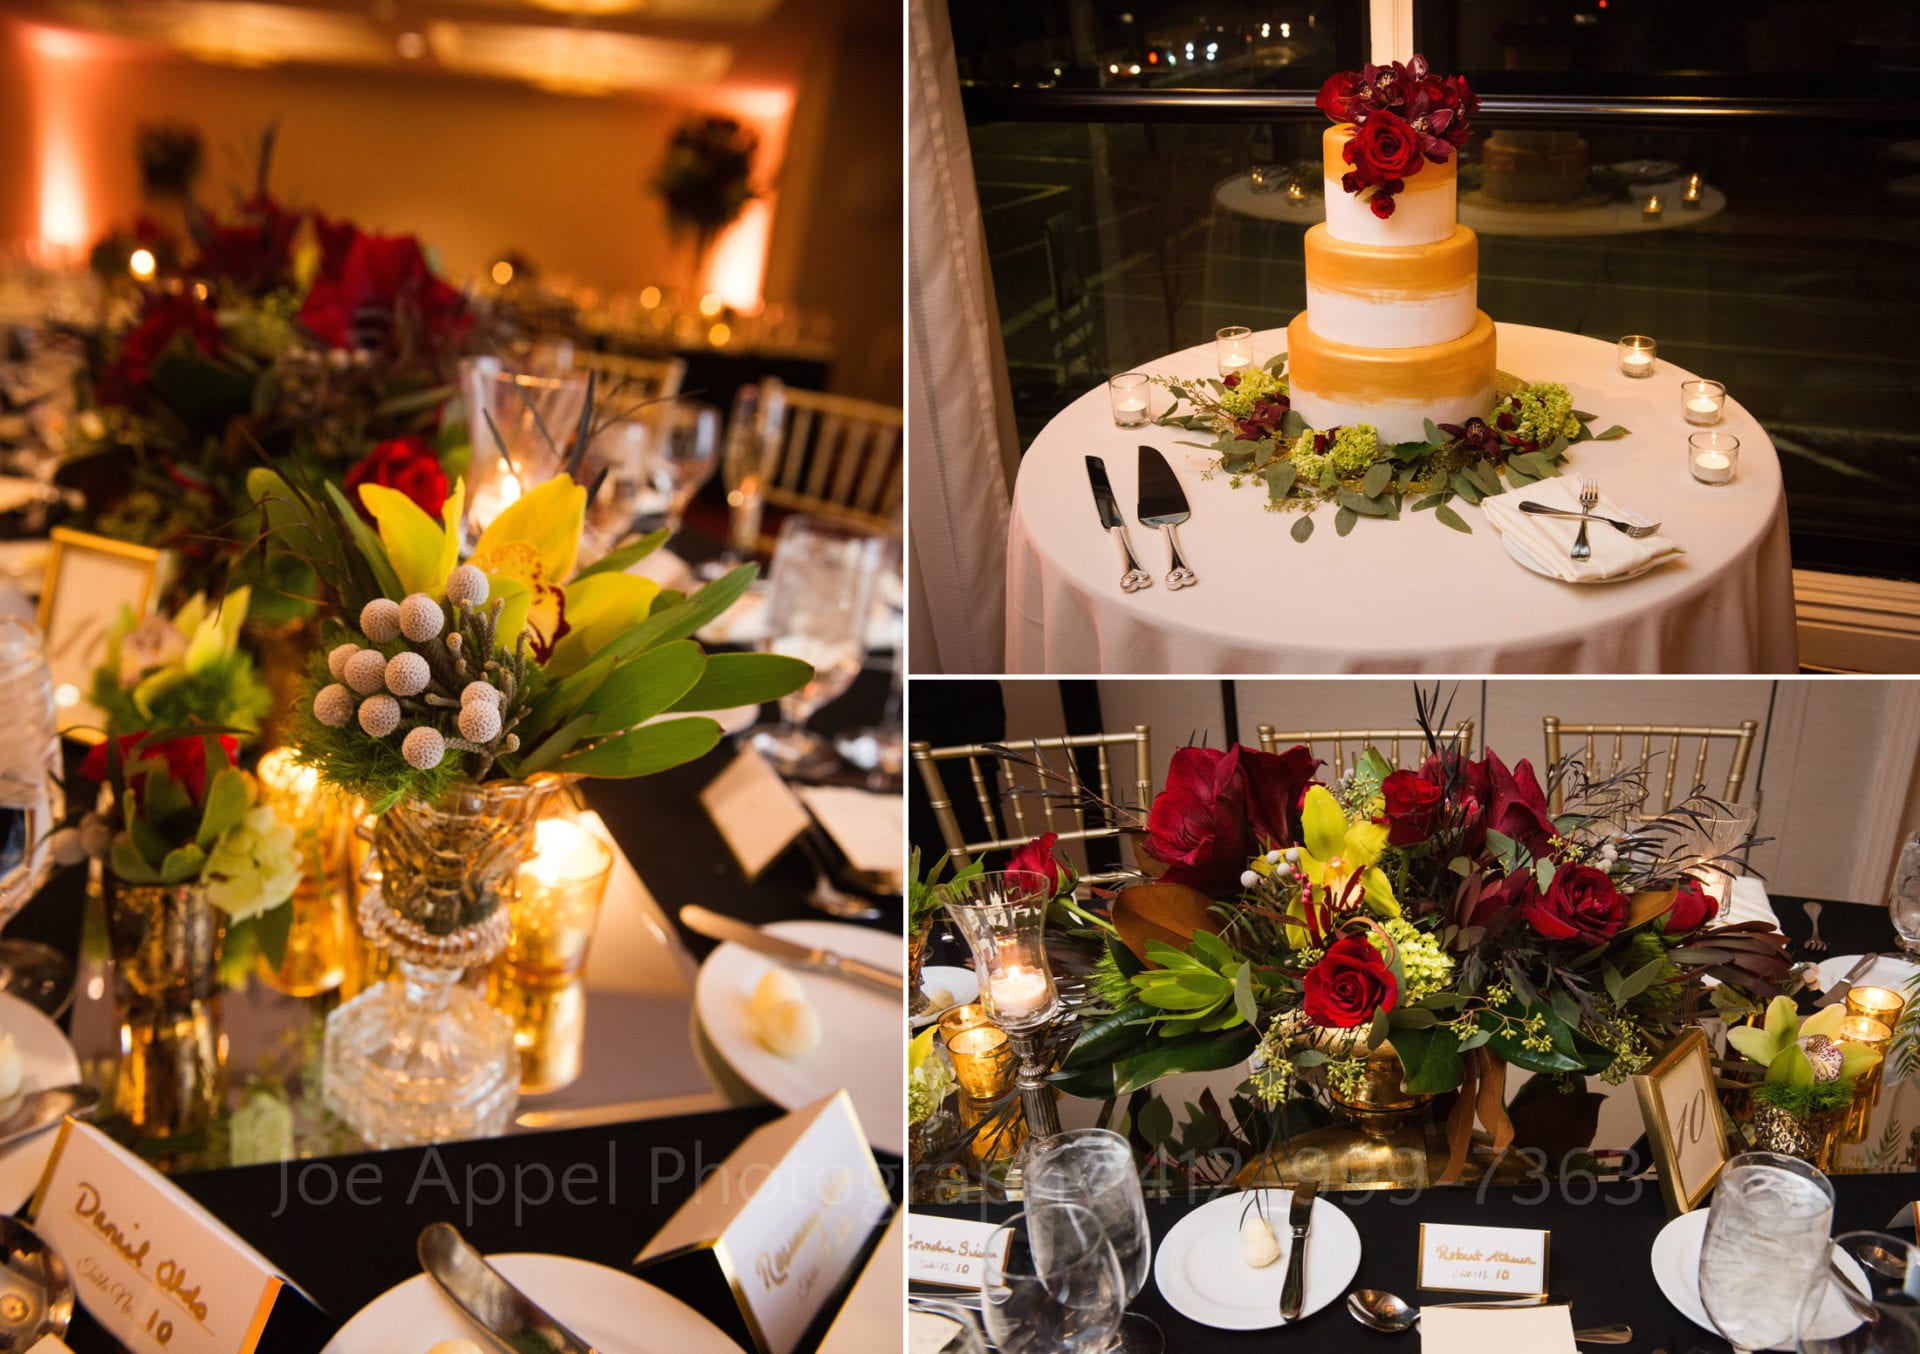 red and green floral centerpieces and a white and gold wedding cake with red roses